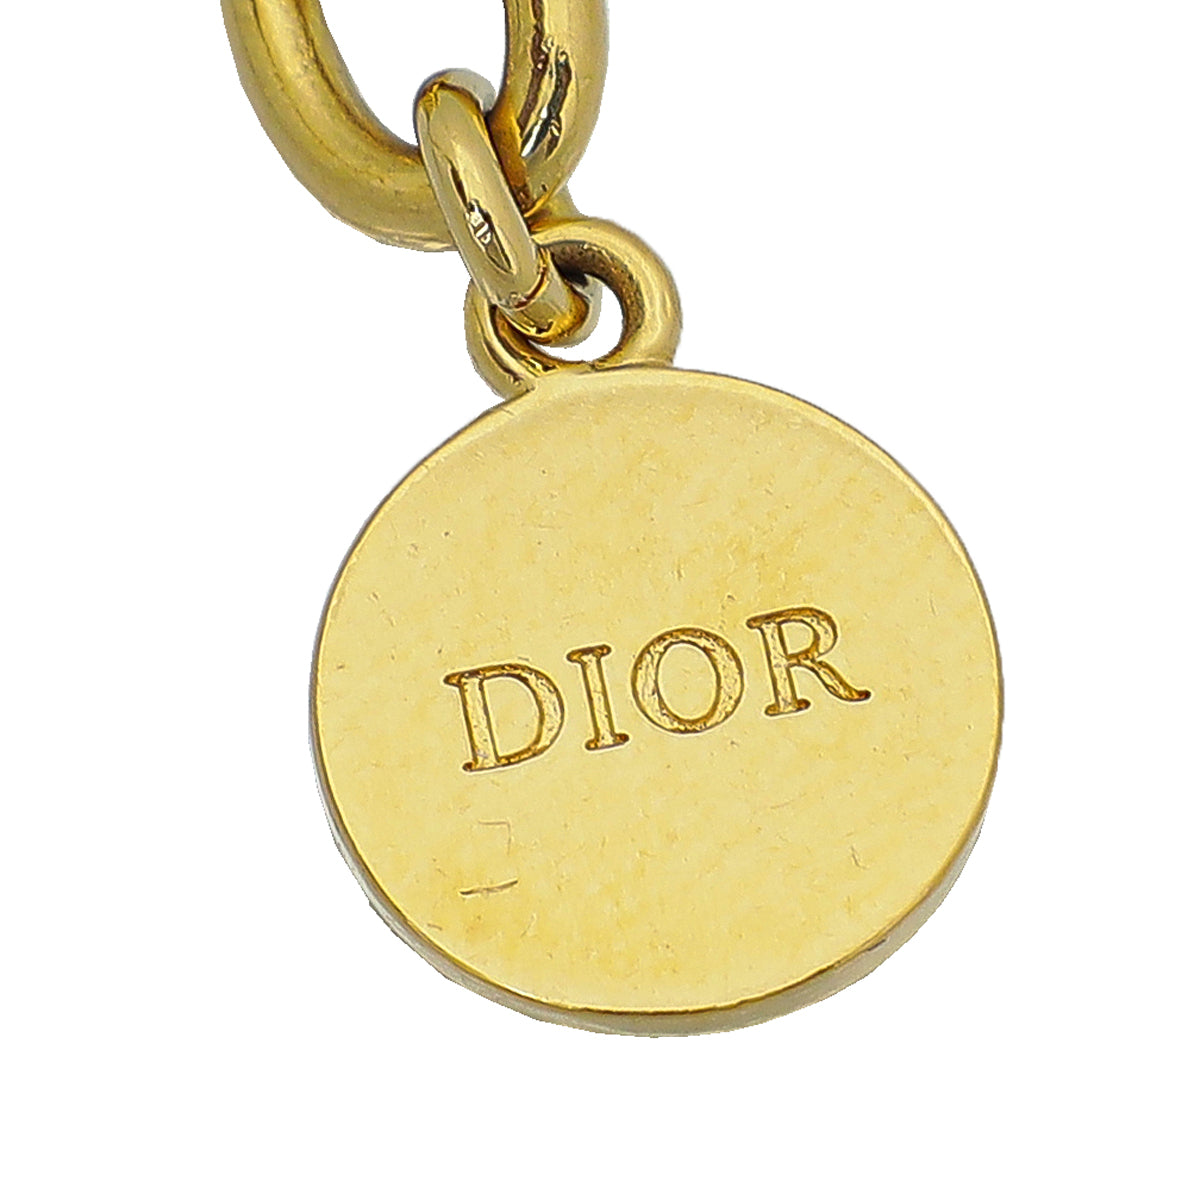 Christian Dior Gold Finish 30 Montaigne Choker Necklace